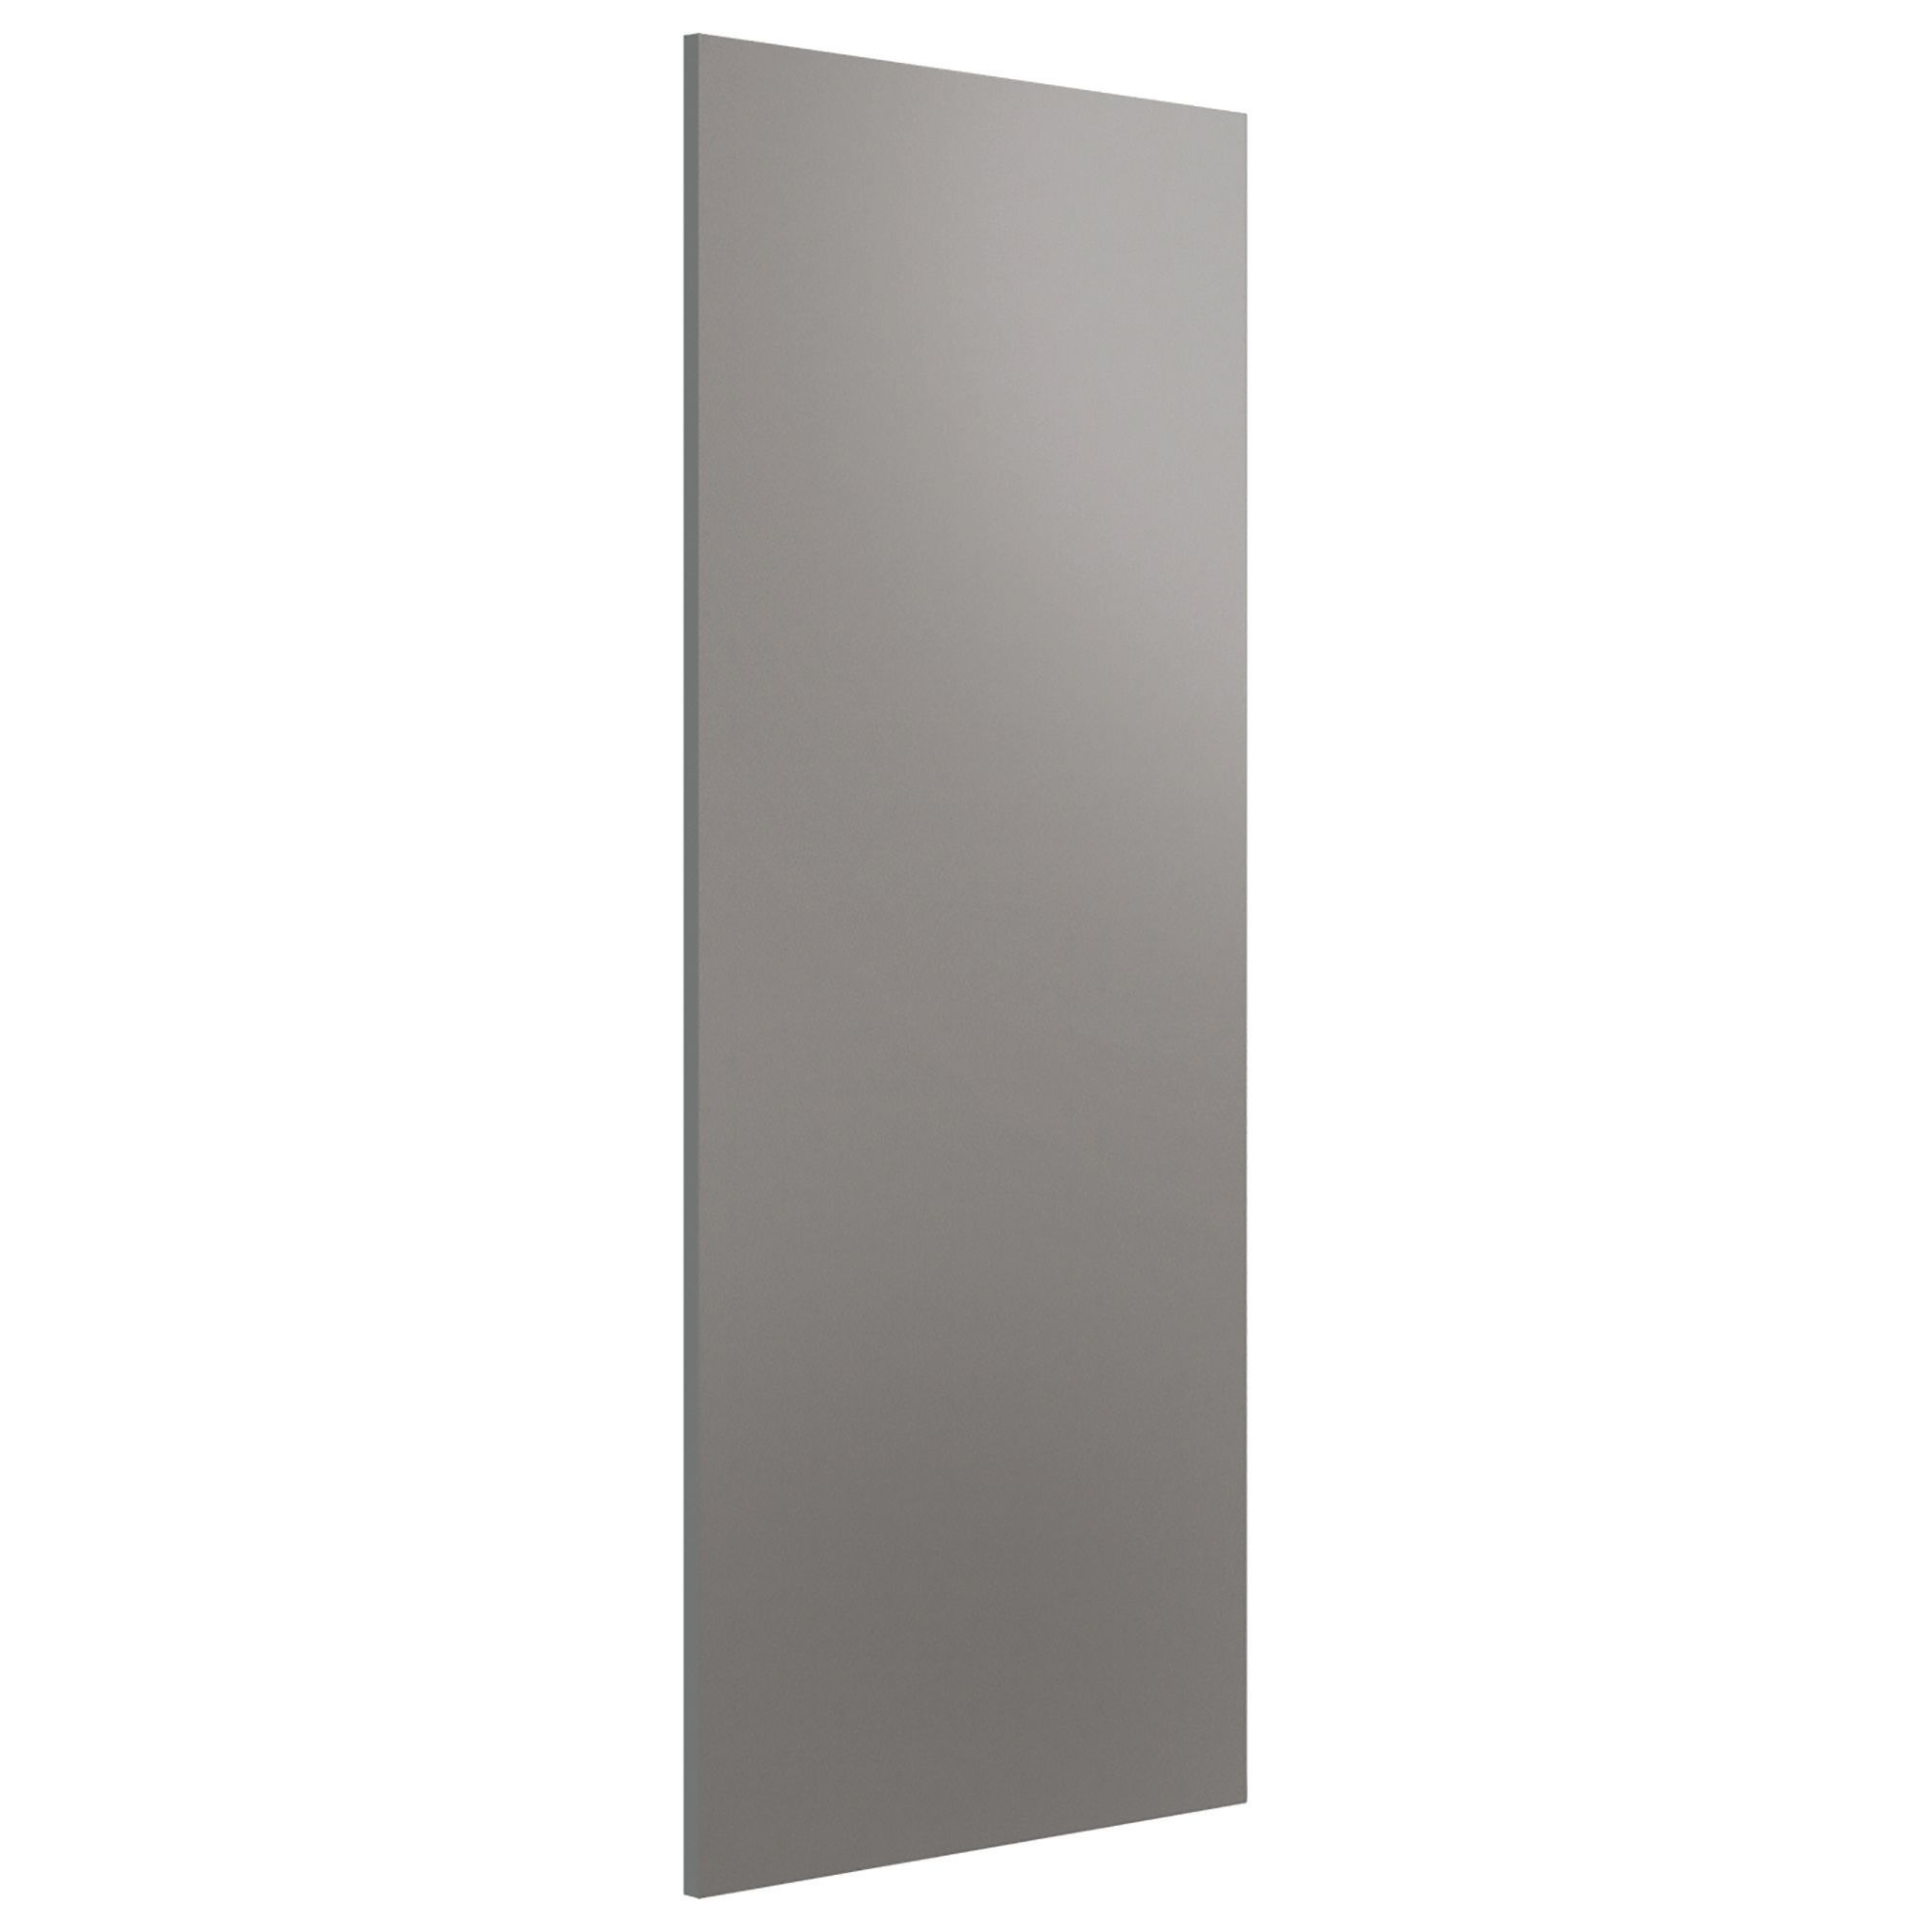 Image of Spacepro Wardrobe End Panel Silver - 2800mm x 620mm x 18mm with Fixing Blocks